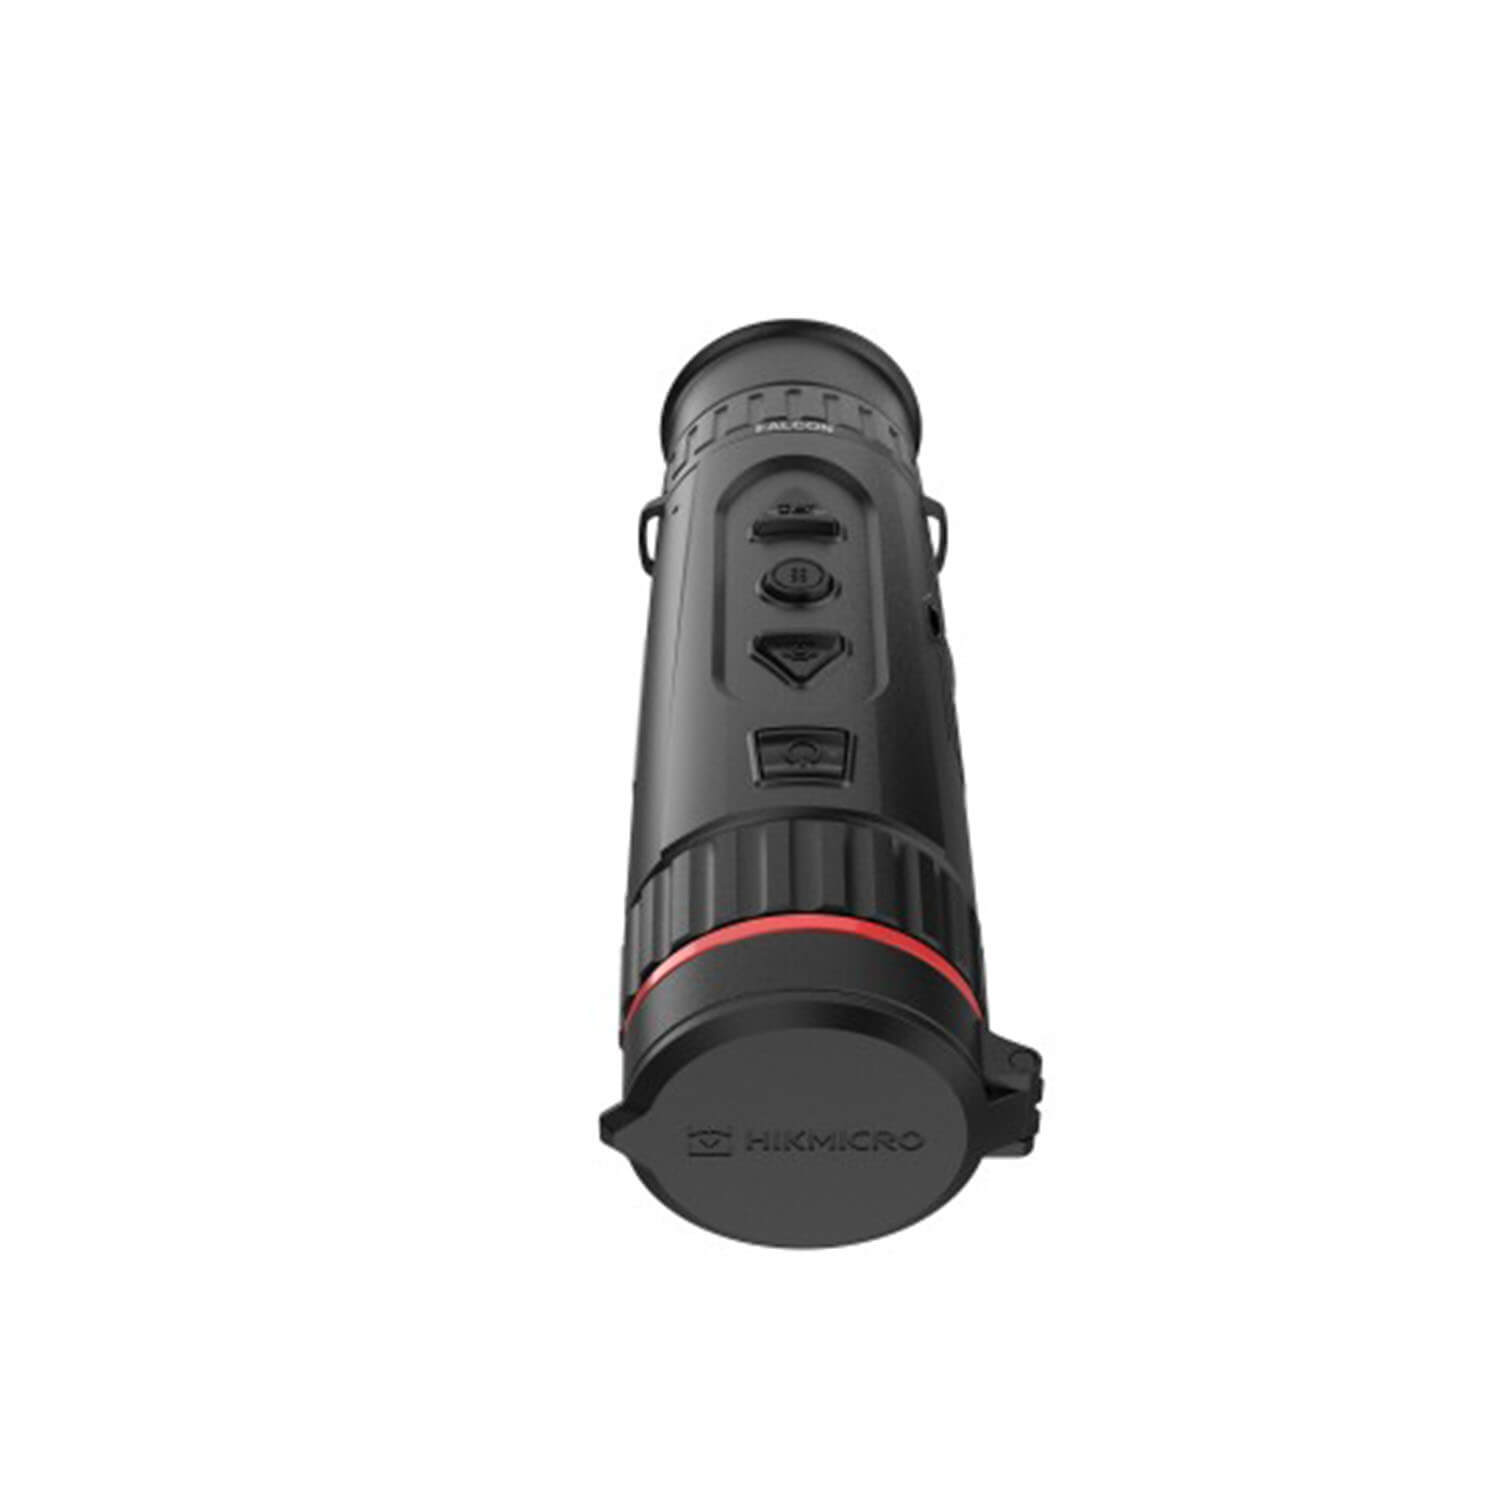 Hikmicro thermal imaging scope Falcon FH35